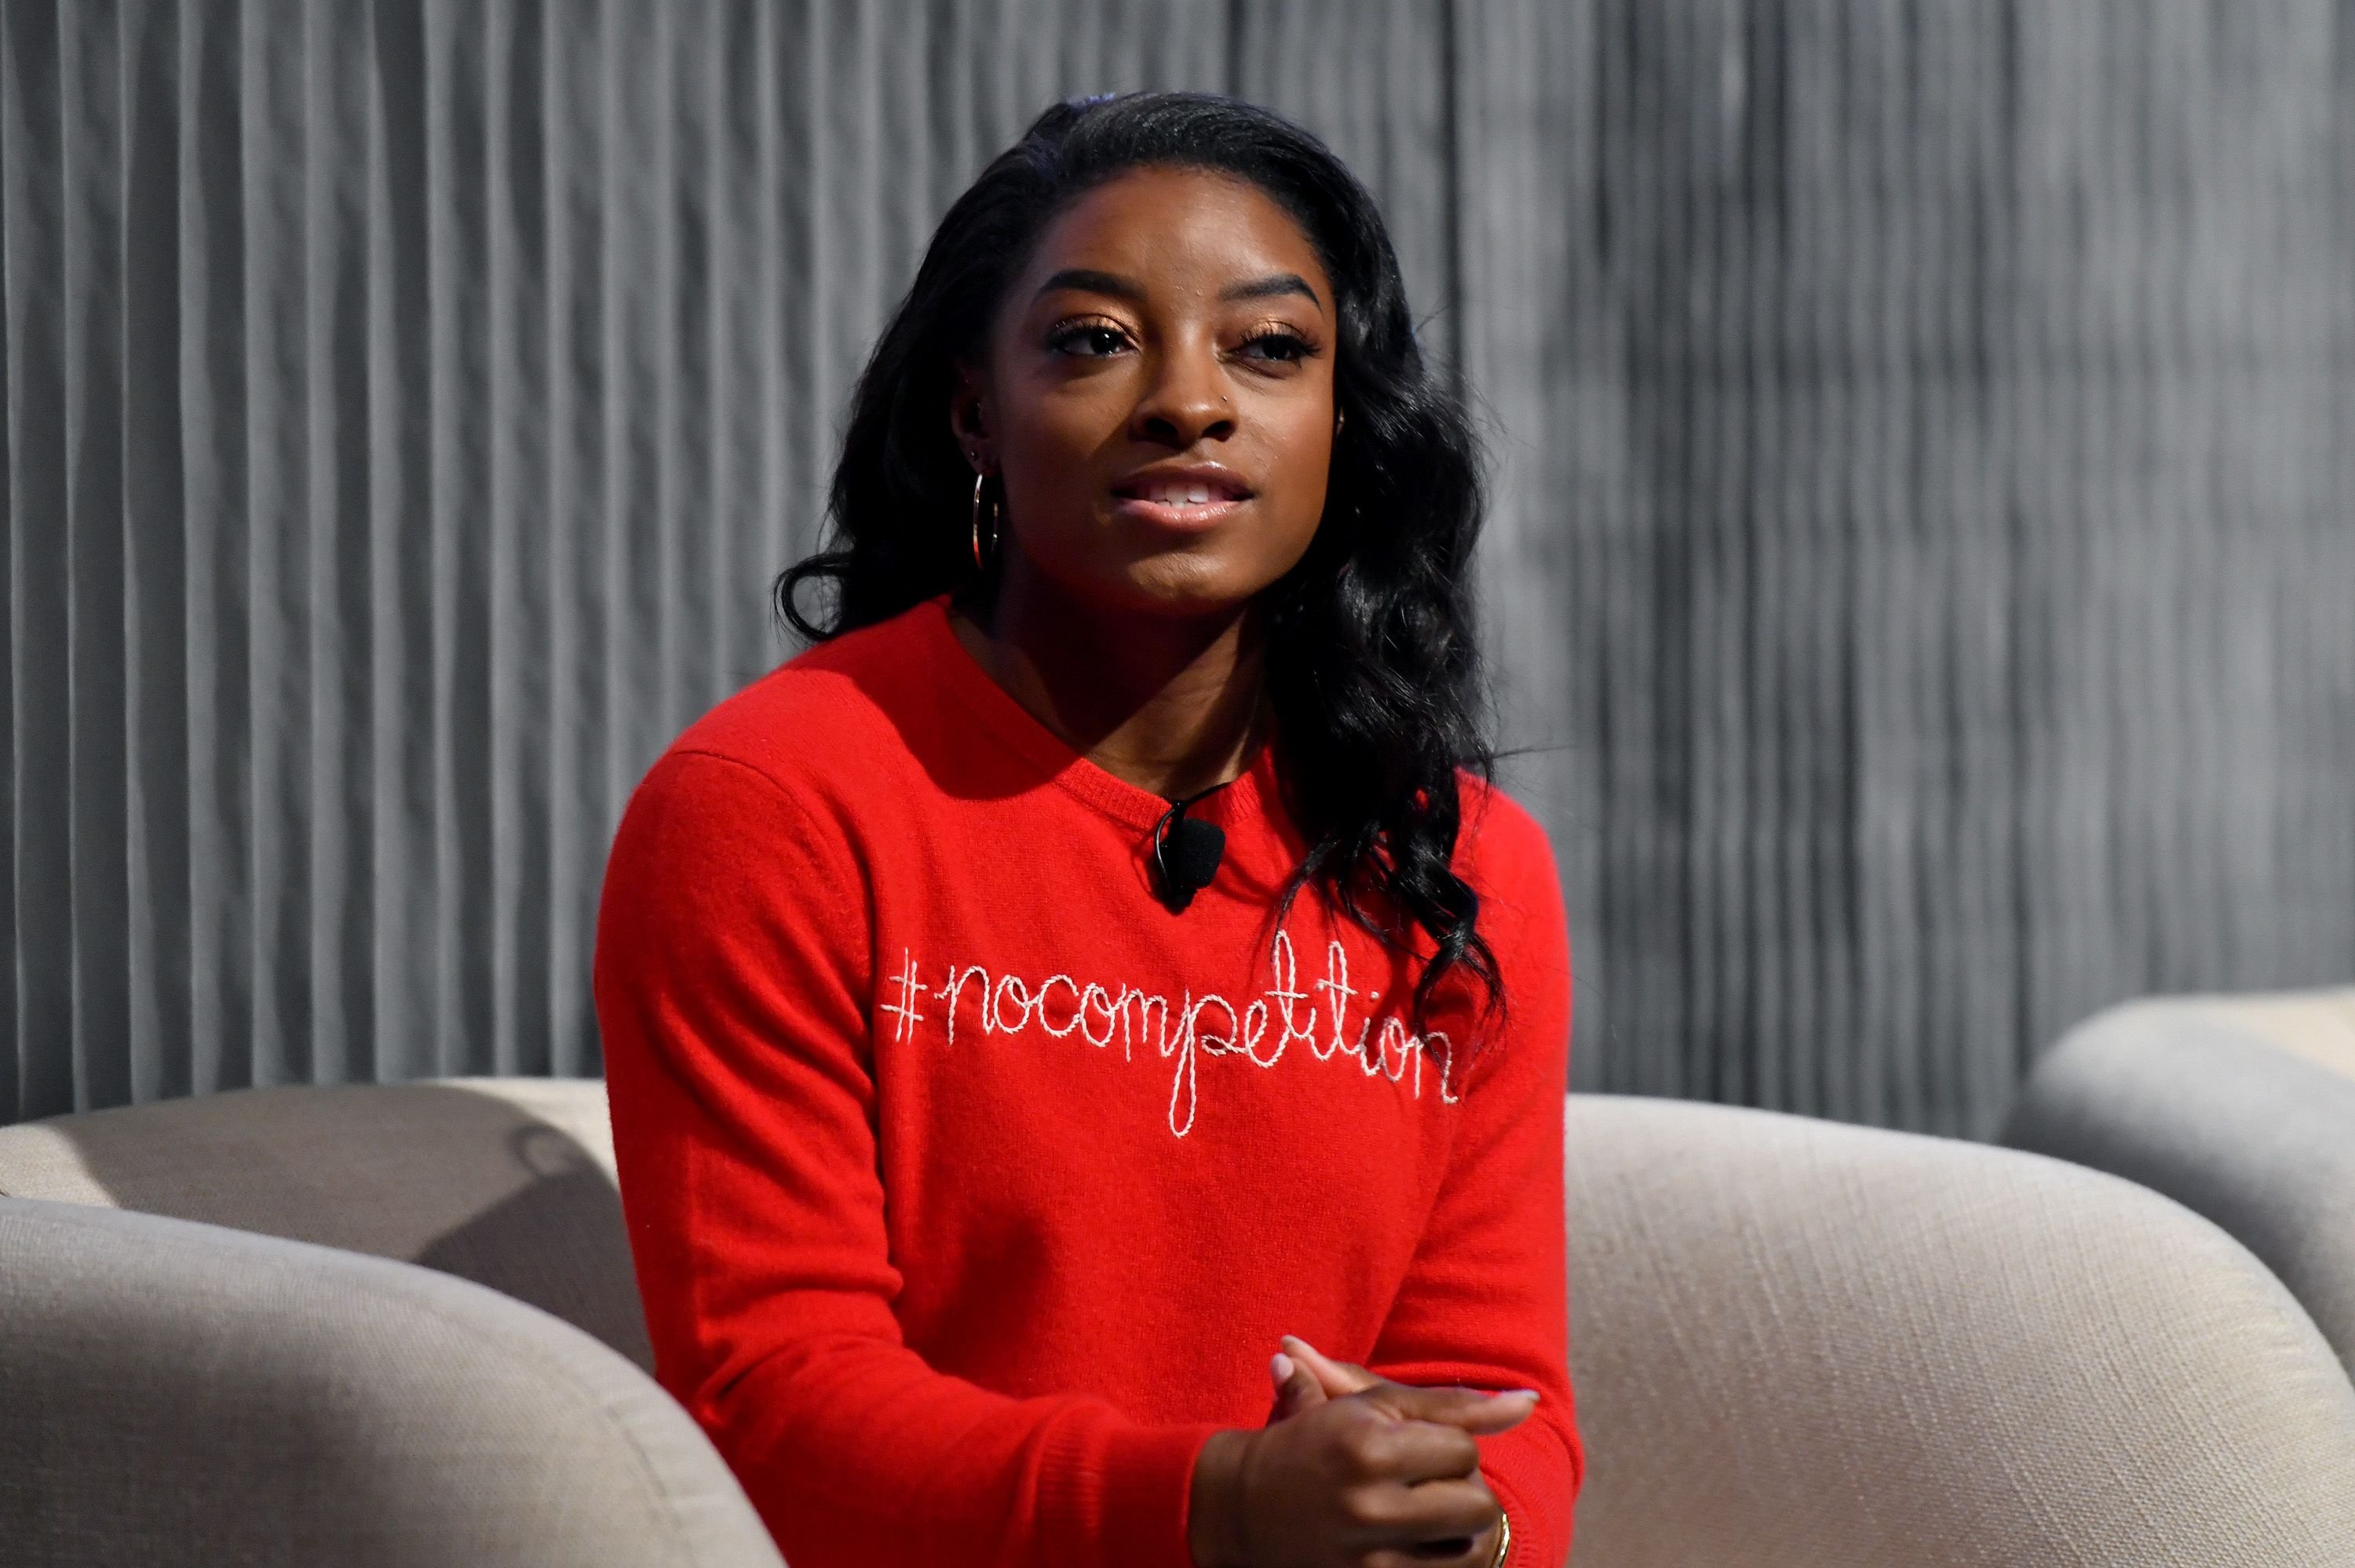 Simone Biles at Crosby Street Hotel on March 04, 2020 | Photo: Getty Images